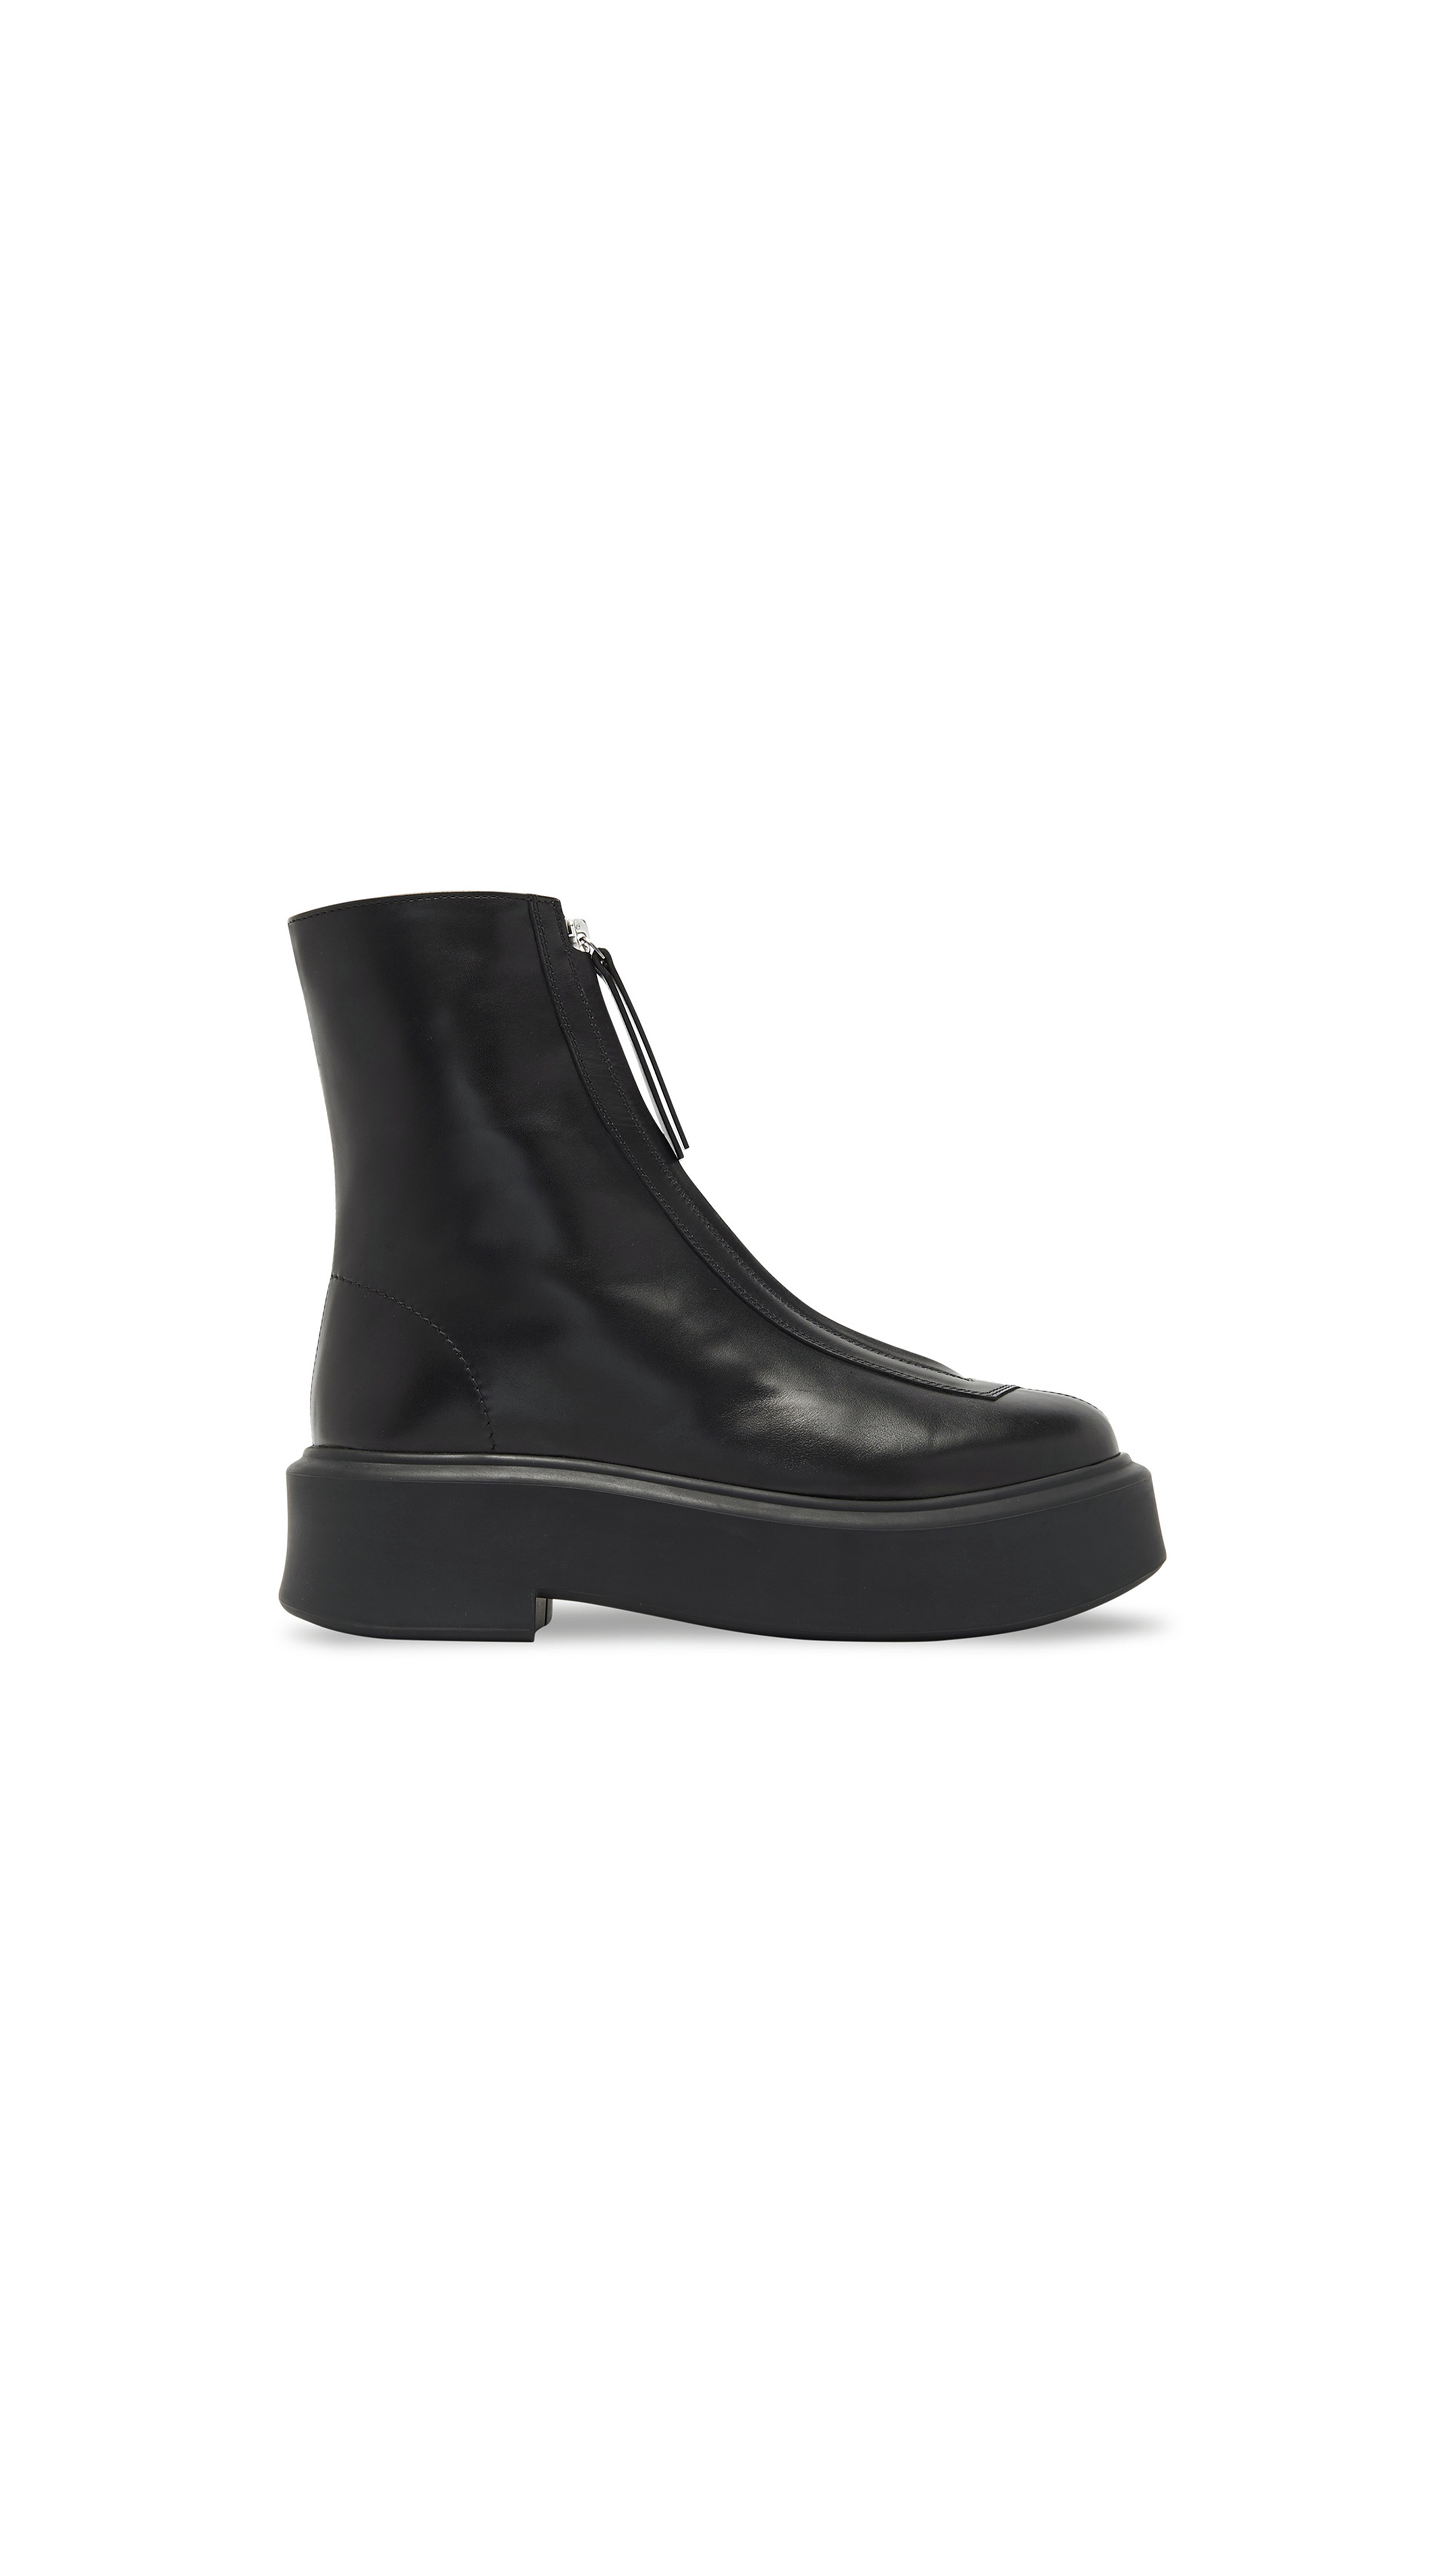 Zipped Boot in Leather - Black